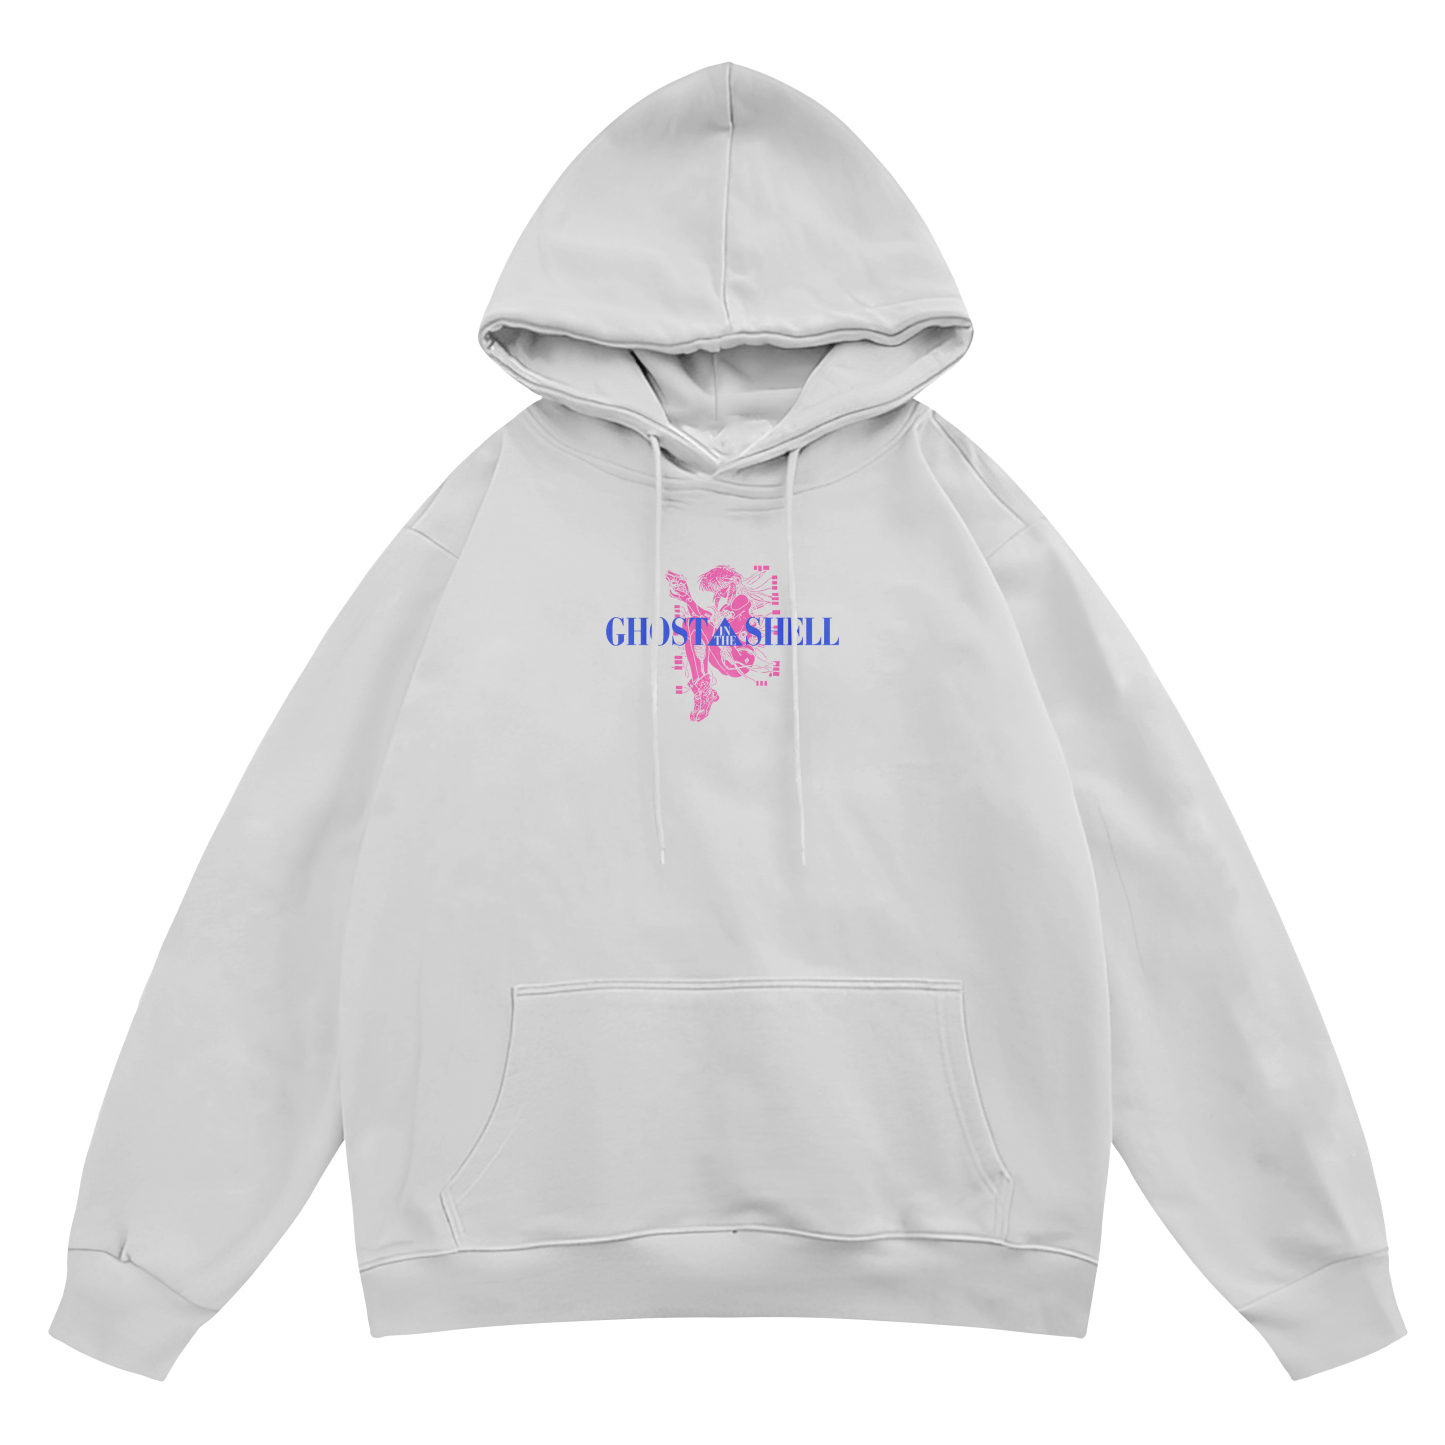 Ghost In the Shell Old School Anime | White Hoodie